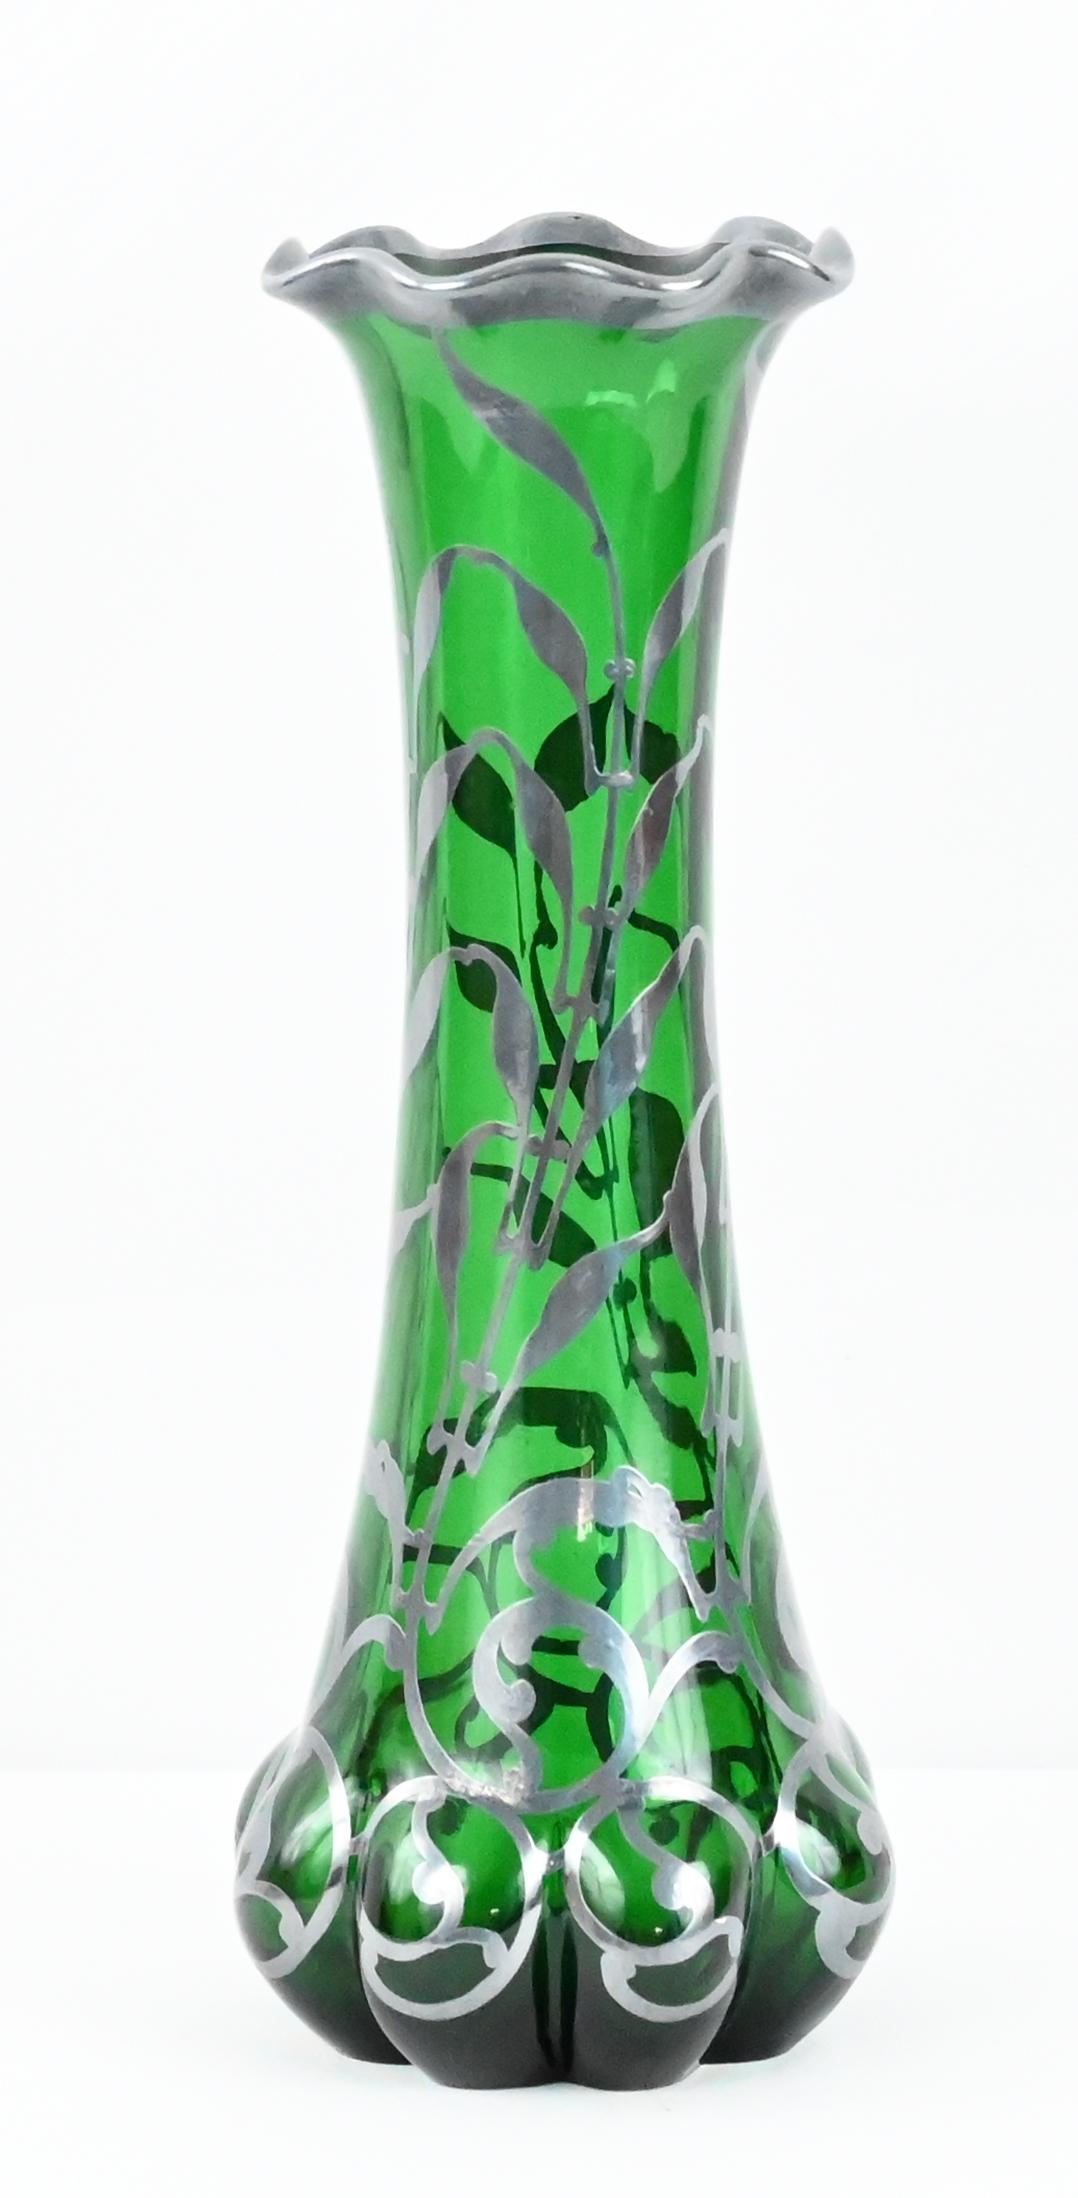 A fine quality Art Nouveau style art glass vase, by Loetz the historic glass maker from the municipality of Austria featuring Alvin Sterling Silver overlay. Overlay in form of open and horizontal patterns with stylized leaves and scrollwork.

A